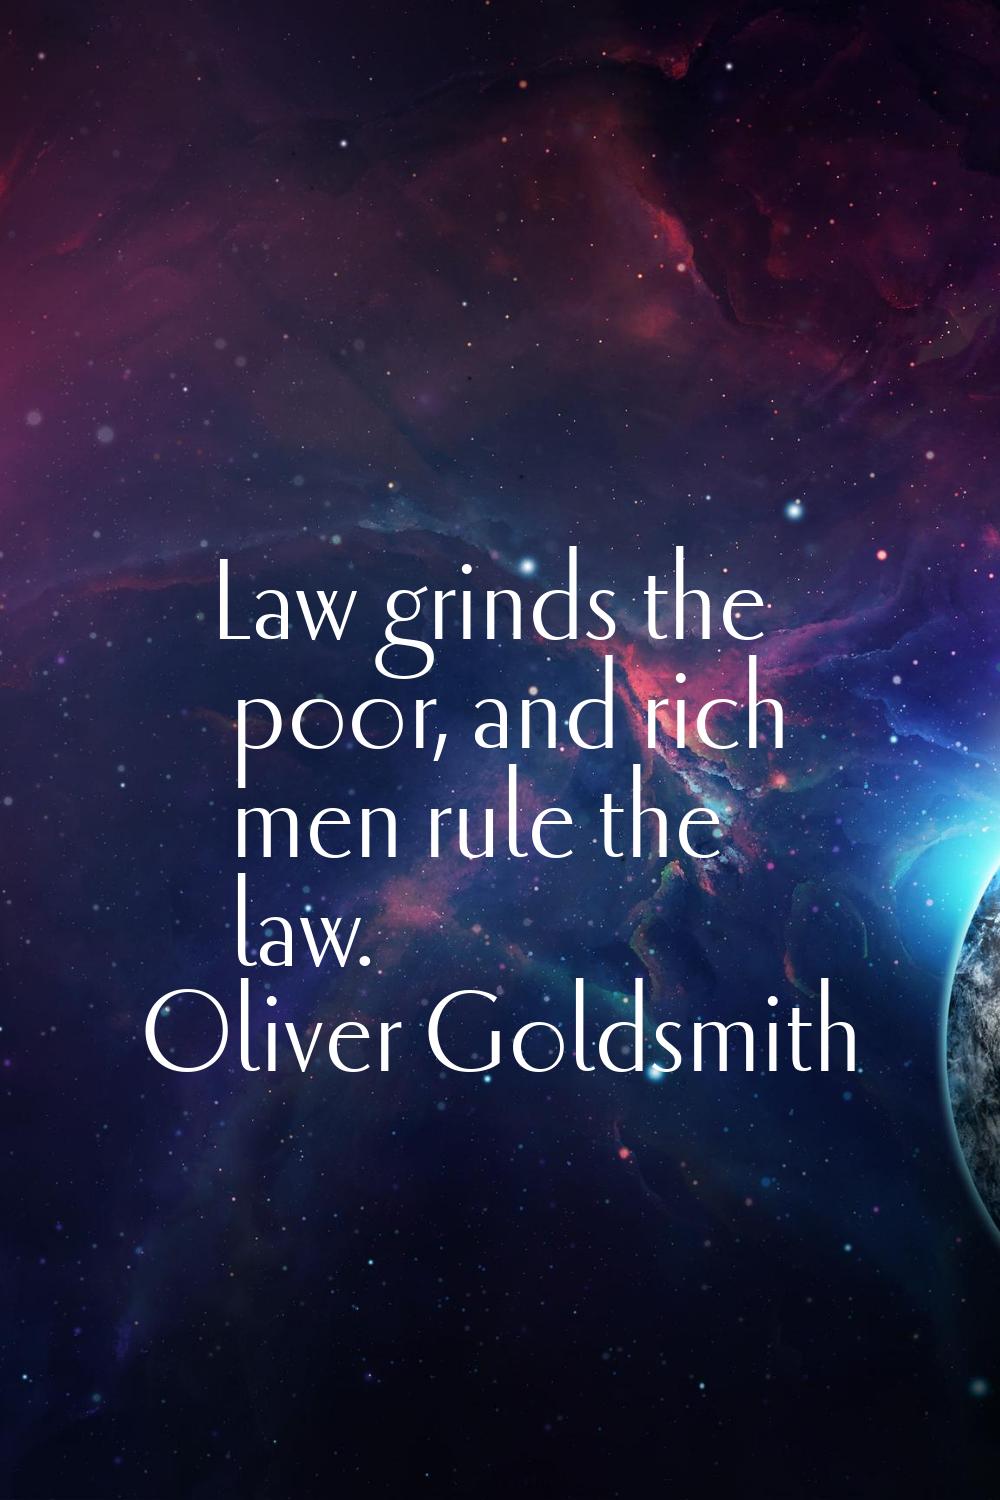 Law grinds the poor, and rich men rule the law.